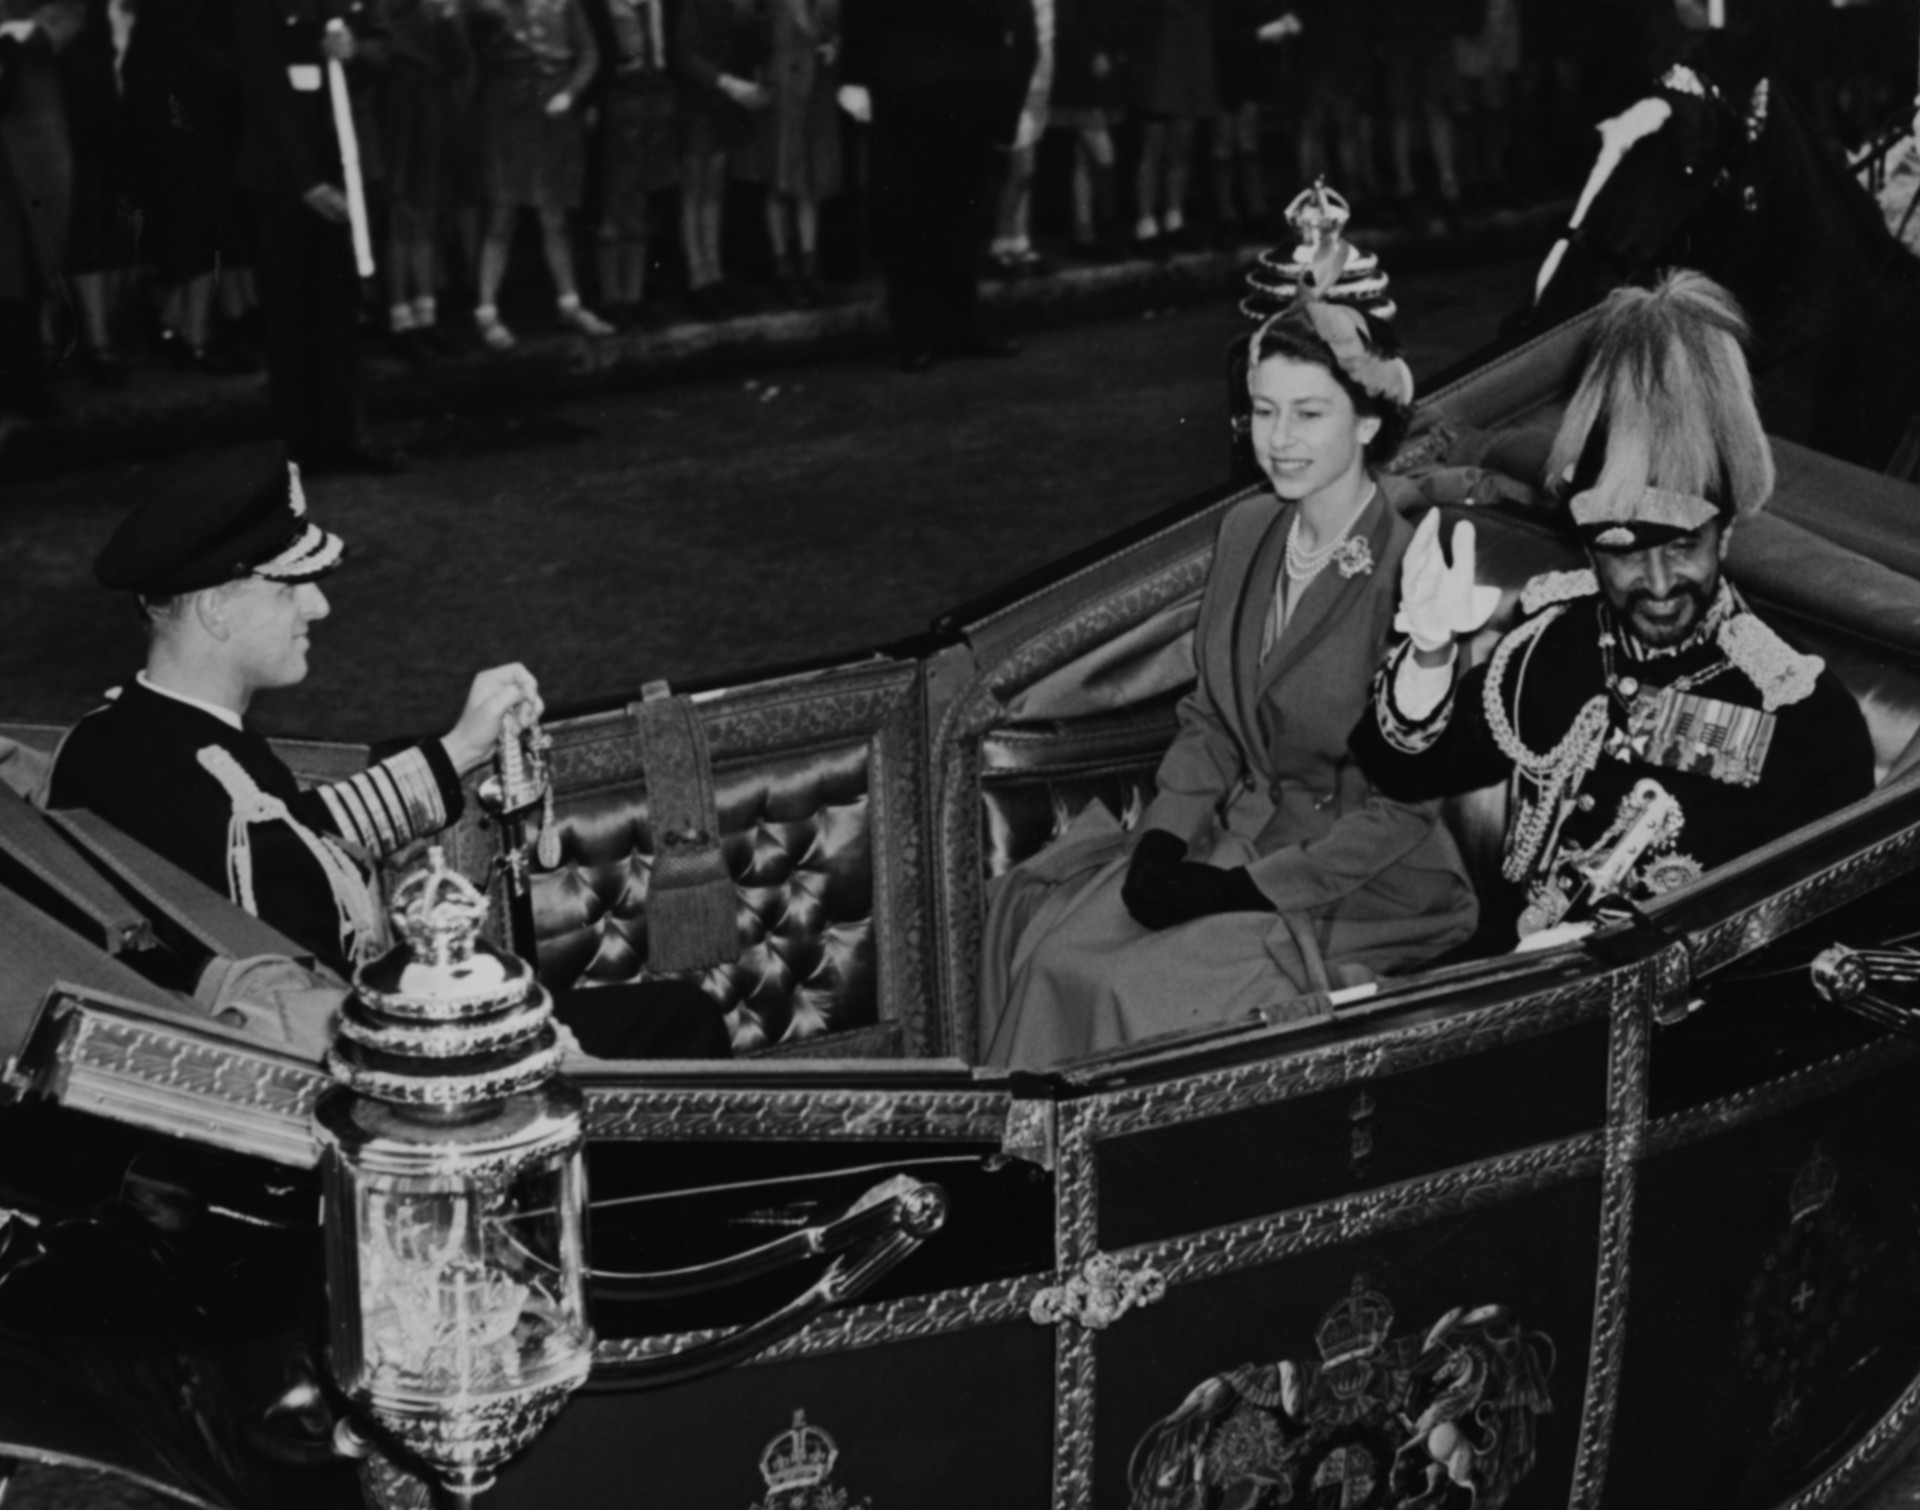 Emperor Haile Selassie of Ethiopia waves to the crowds as he rides in an open carriage with Queen Elizabeth II and <a href="https://uk.starsinsider.com/celebrity/256255/the-life-and-times-of-hrh-prince-philip-duke-of-edinburgh" rel="noopener">Prince Philip</a>.<p><a href="https://www.msn.com/en-nz/community/channel/vid-7xx8mnucu55yw63we9va2gwr7uihbxwc68fxqp25x6tg4ftibpra?cvid=94631541bc0f4f89bfd59158d696ad7e">Follow us and access great exclusive content every day</a></p>